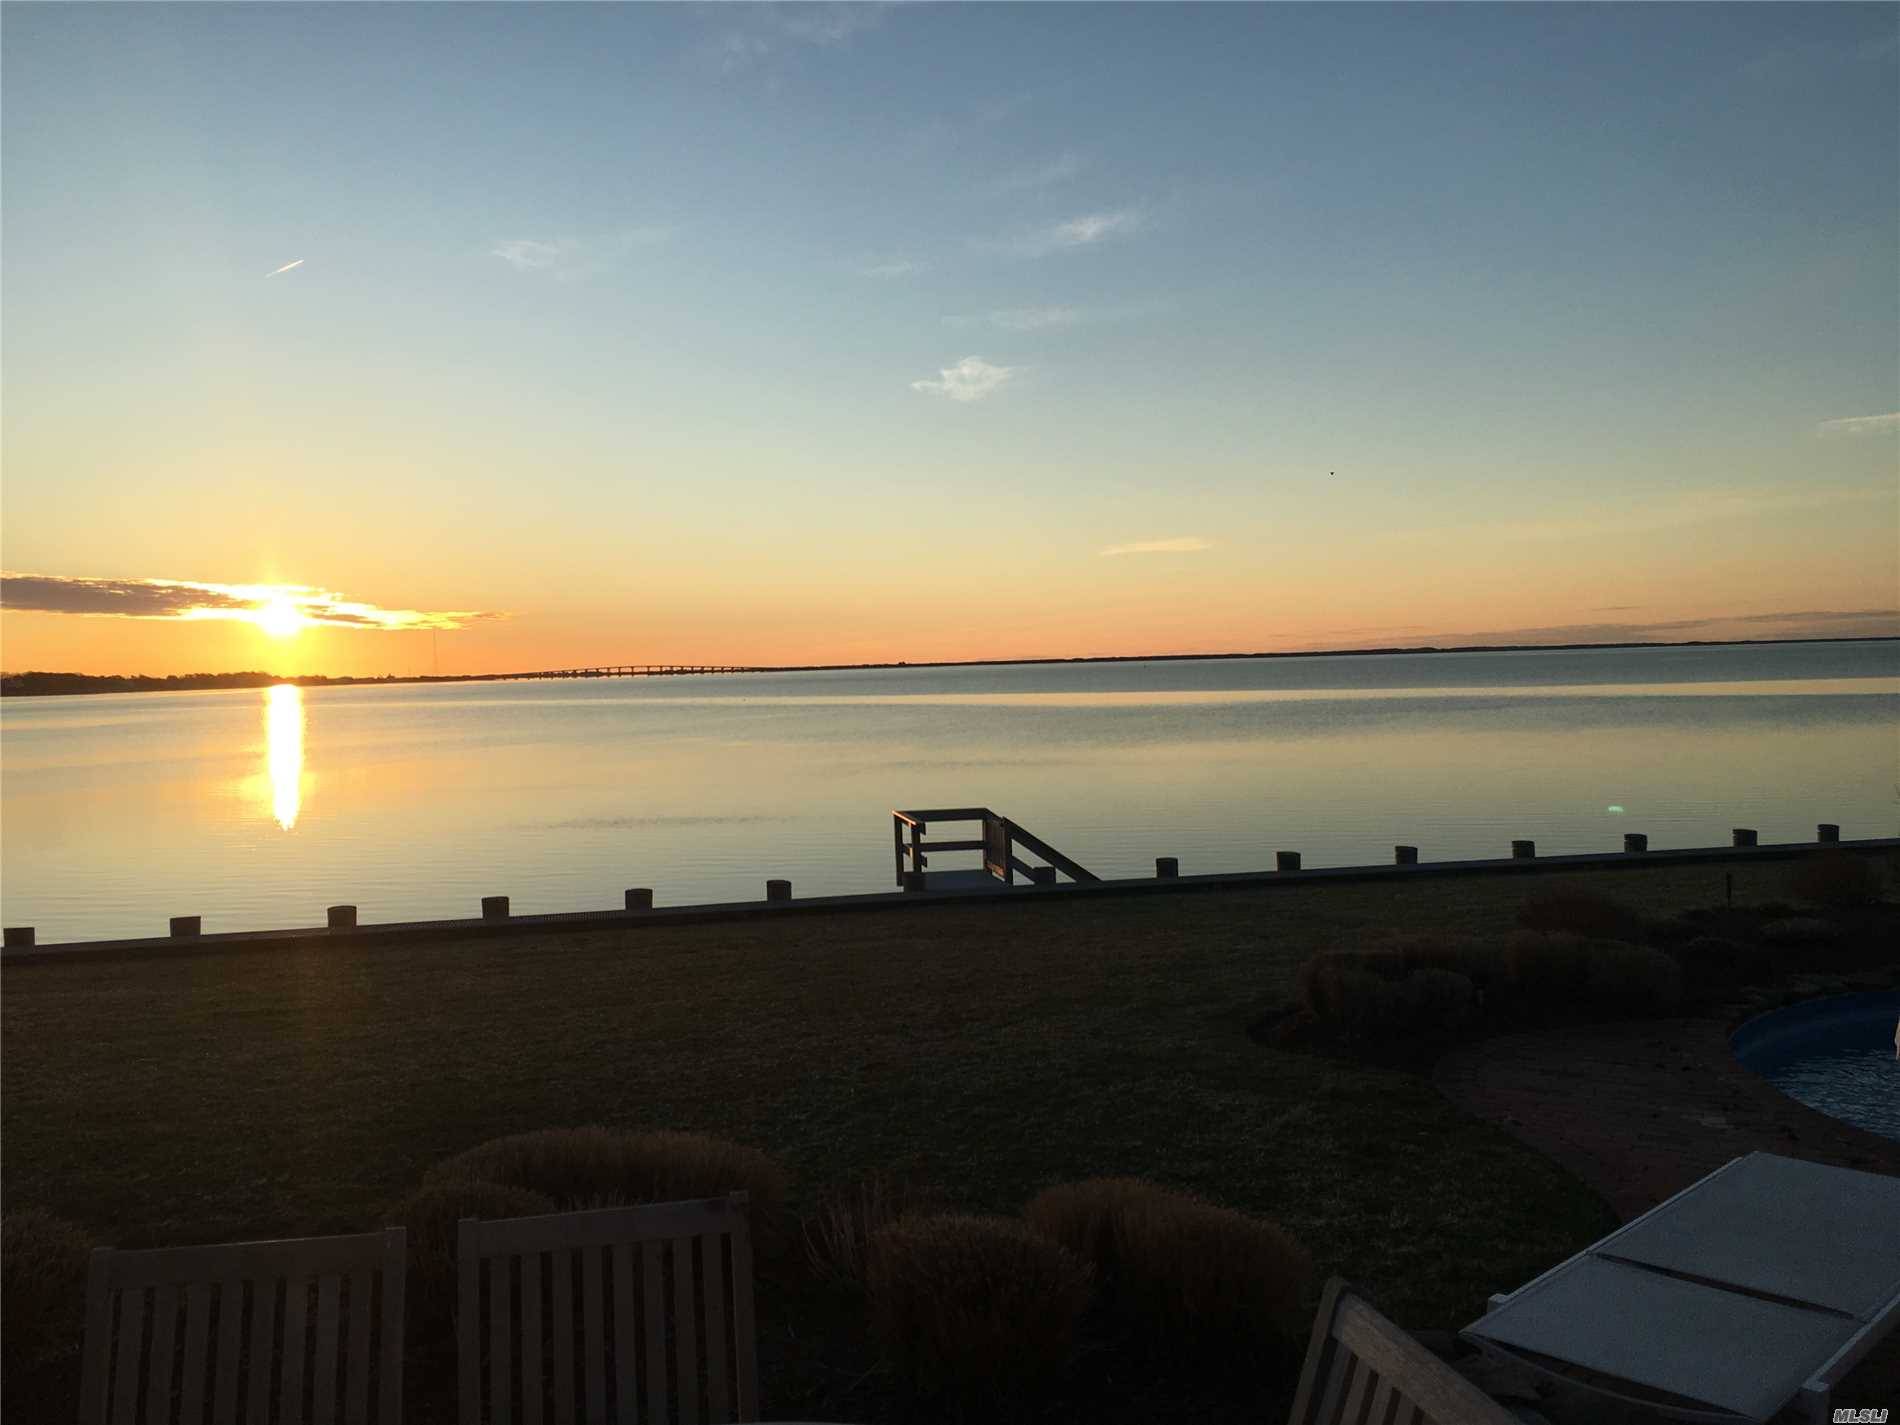 Watch the sun rise over Shinnecock Bay from almost every room in this very special and immaculate home tucked away in an upscale community in East Quogue.